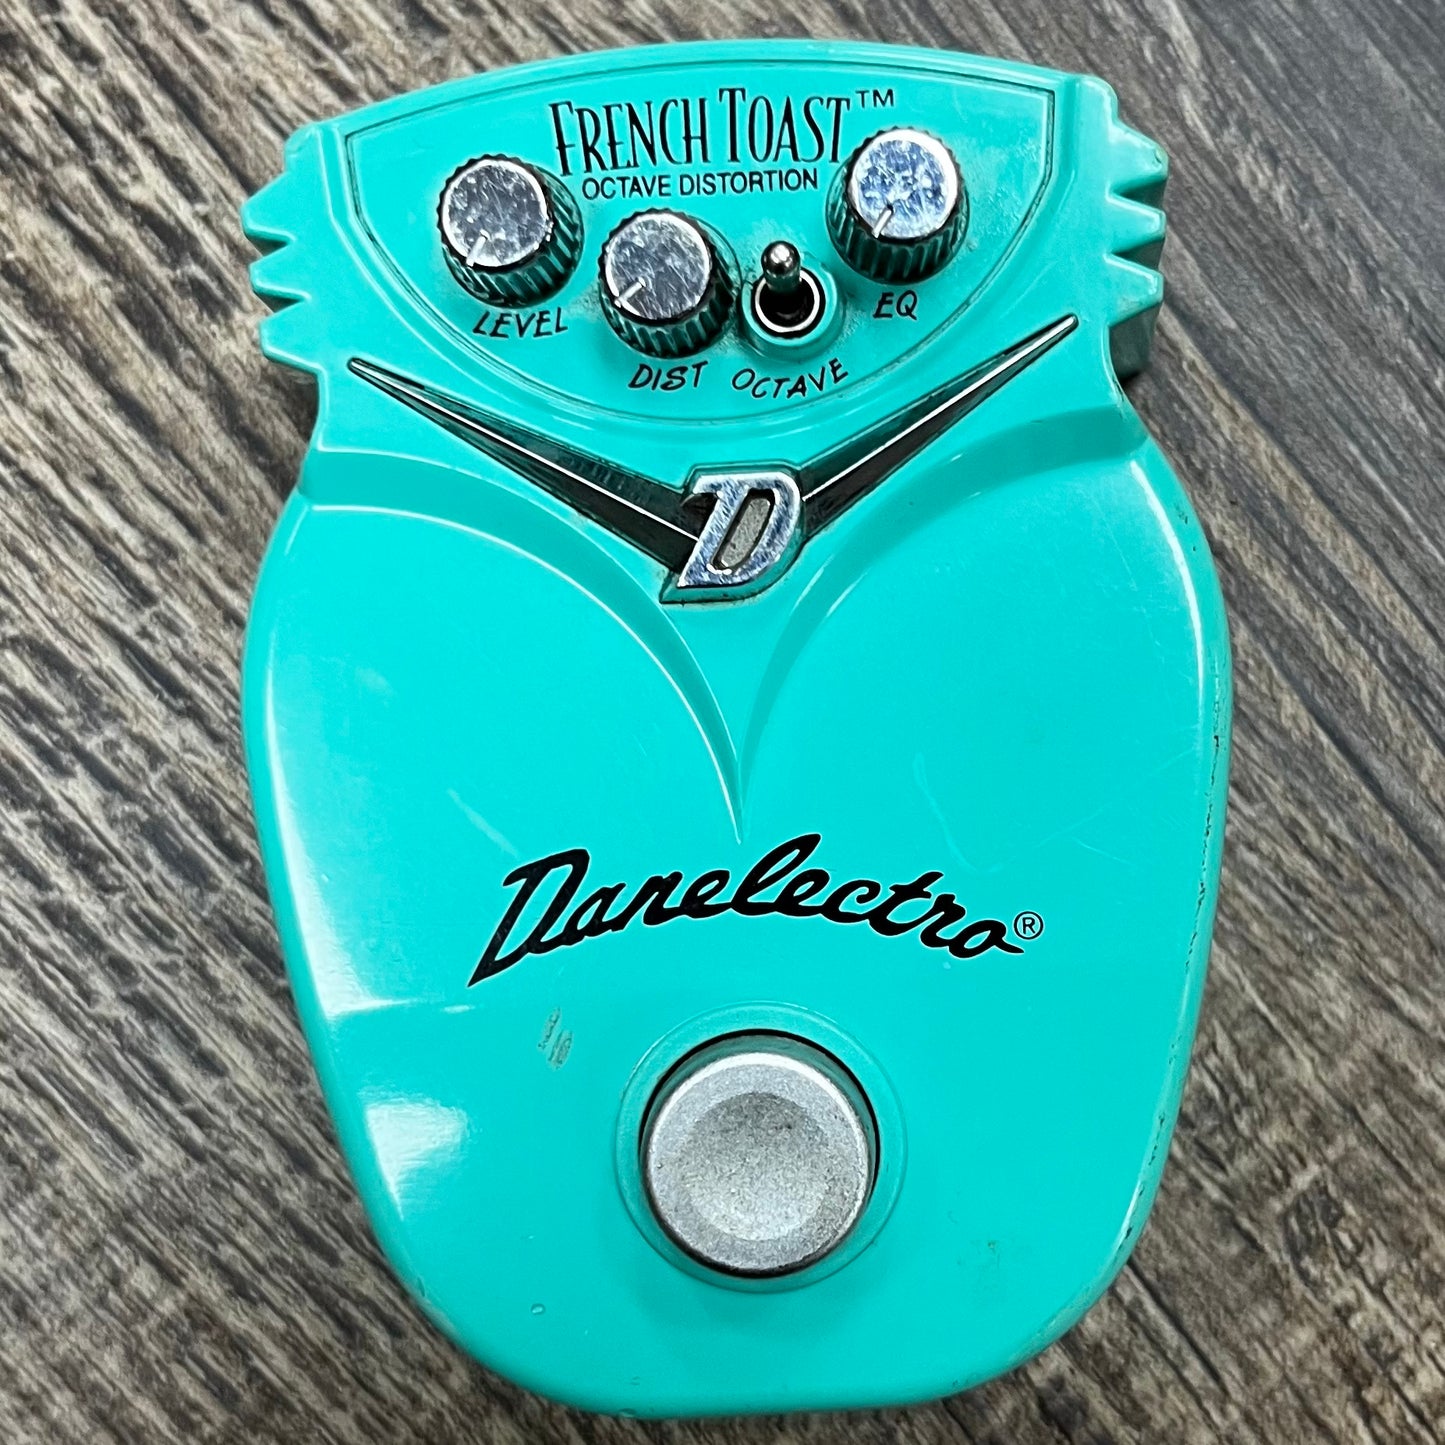 Top of Used Danelectro Frenchtoast Octave Distortion Pedal TFW332